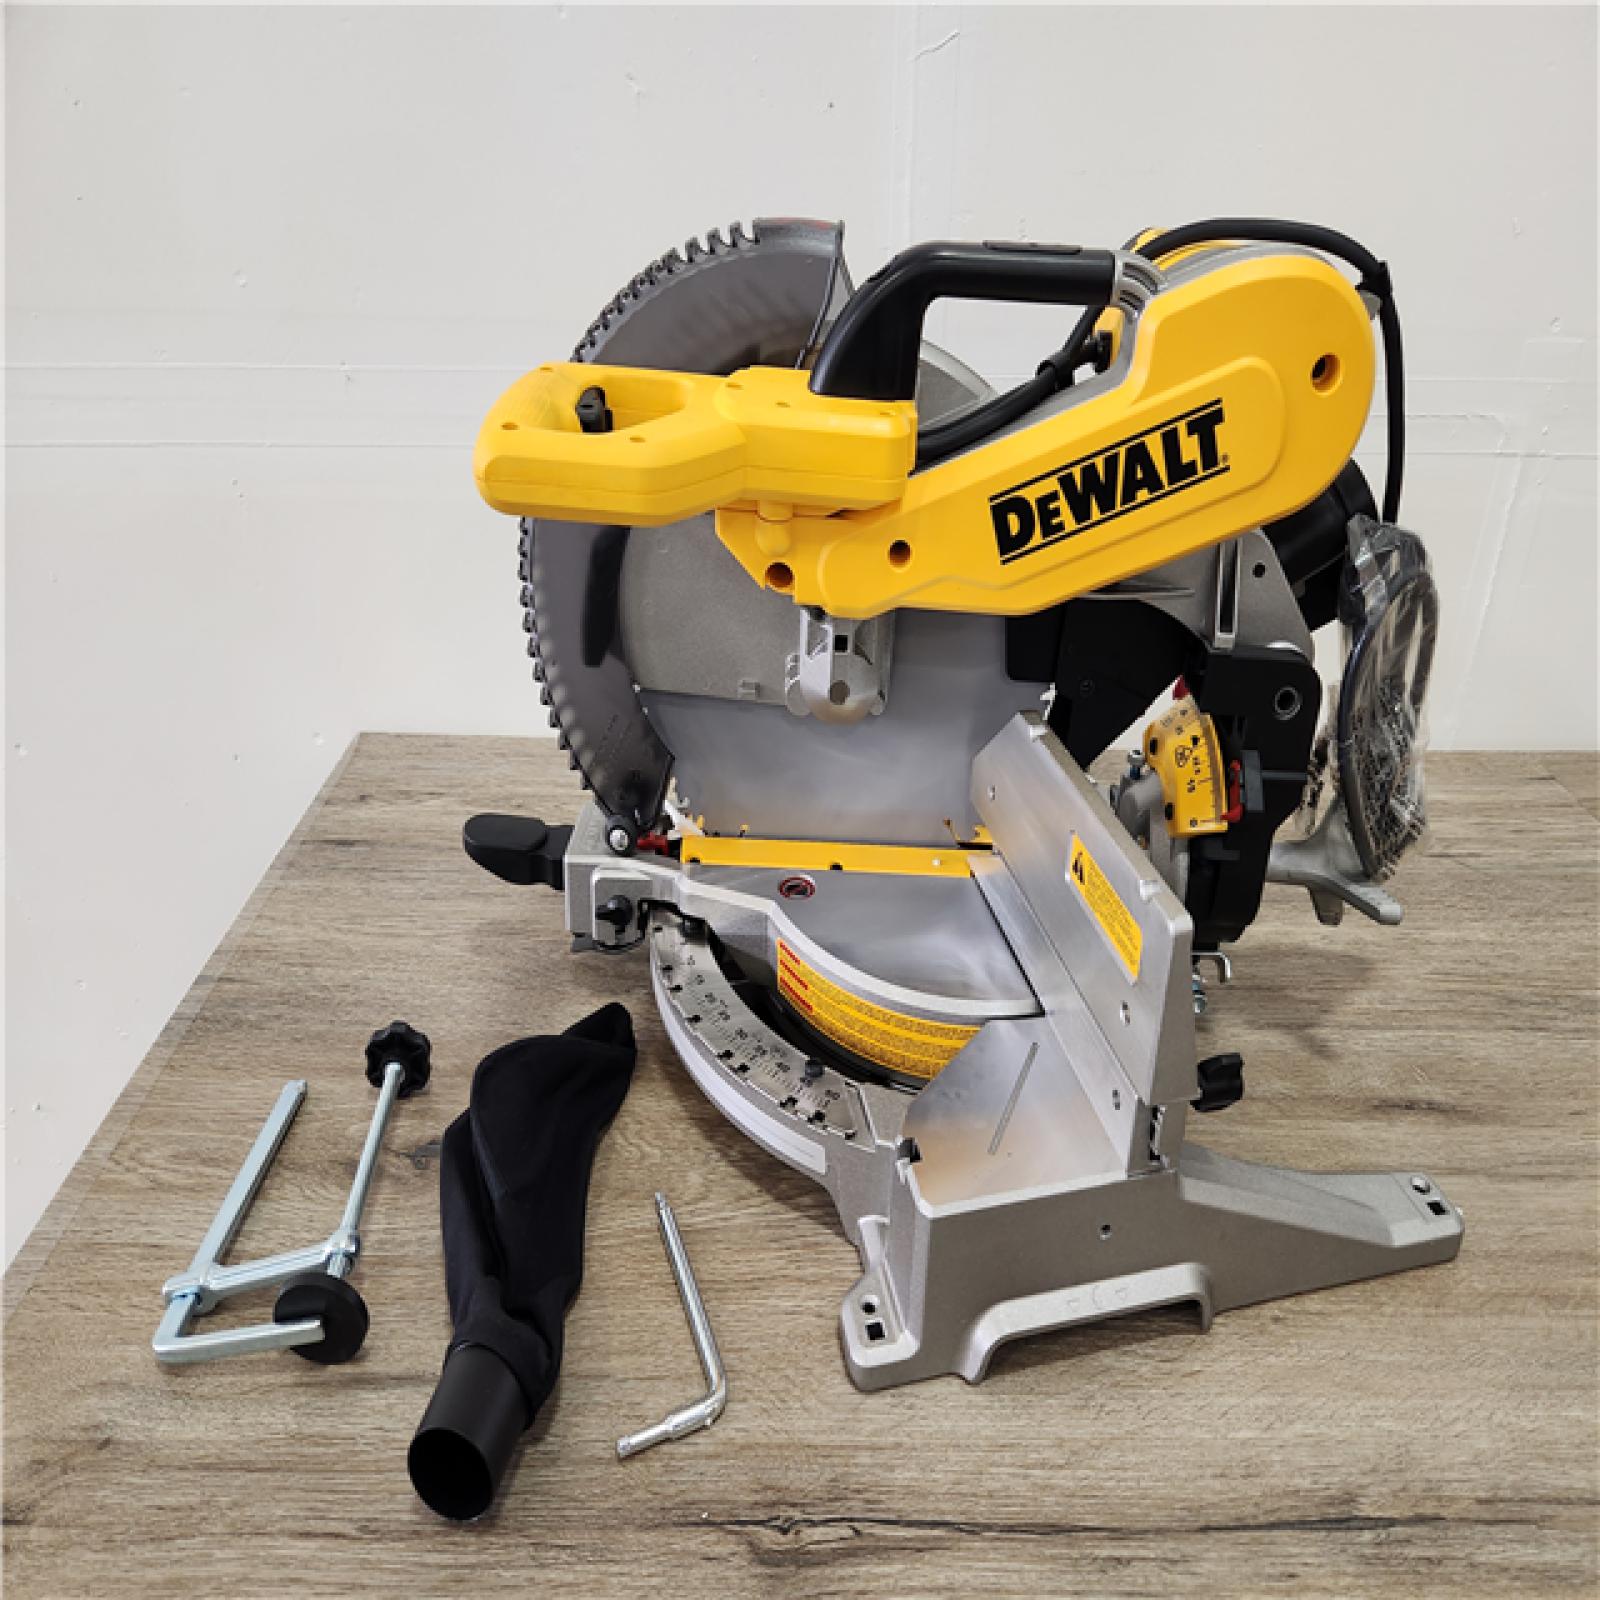 Phoenix Location Appears NEW DEWALT 15 Amp Corded 12 in. Compound Double Bevel Miter Saw DWS716